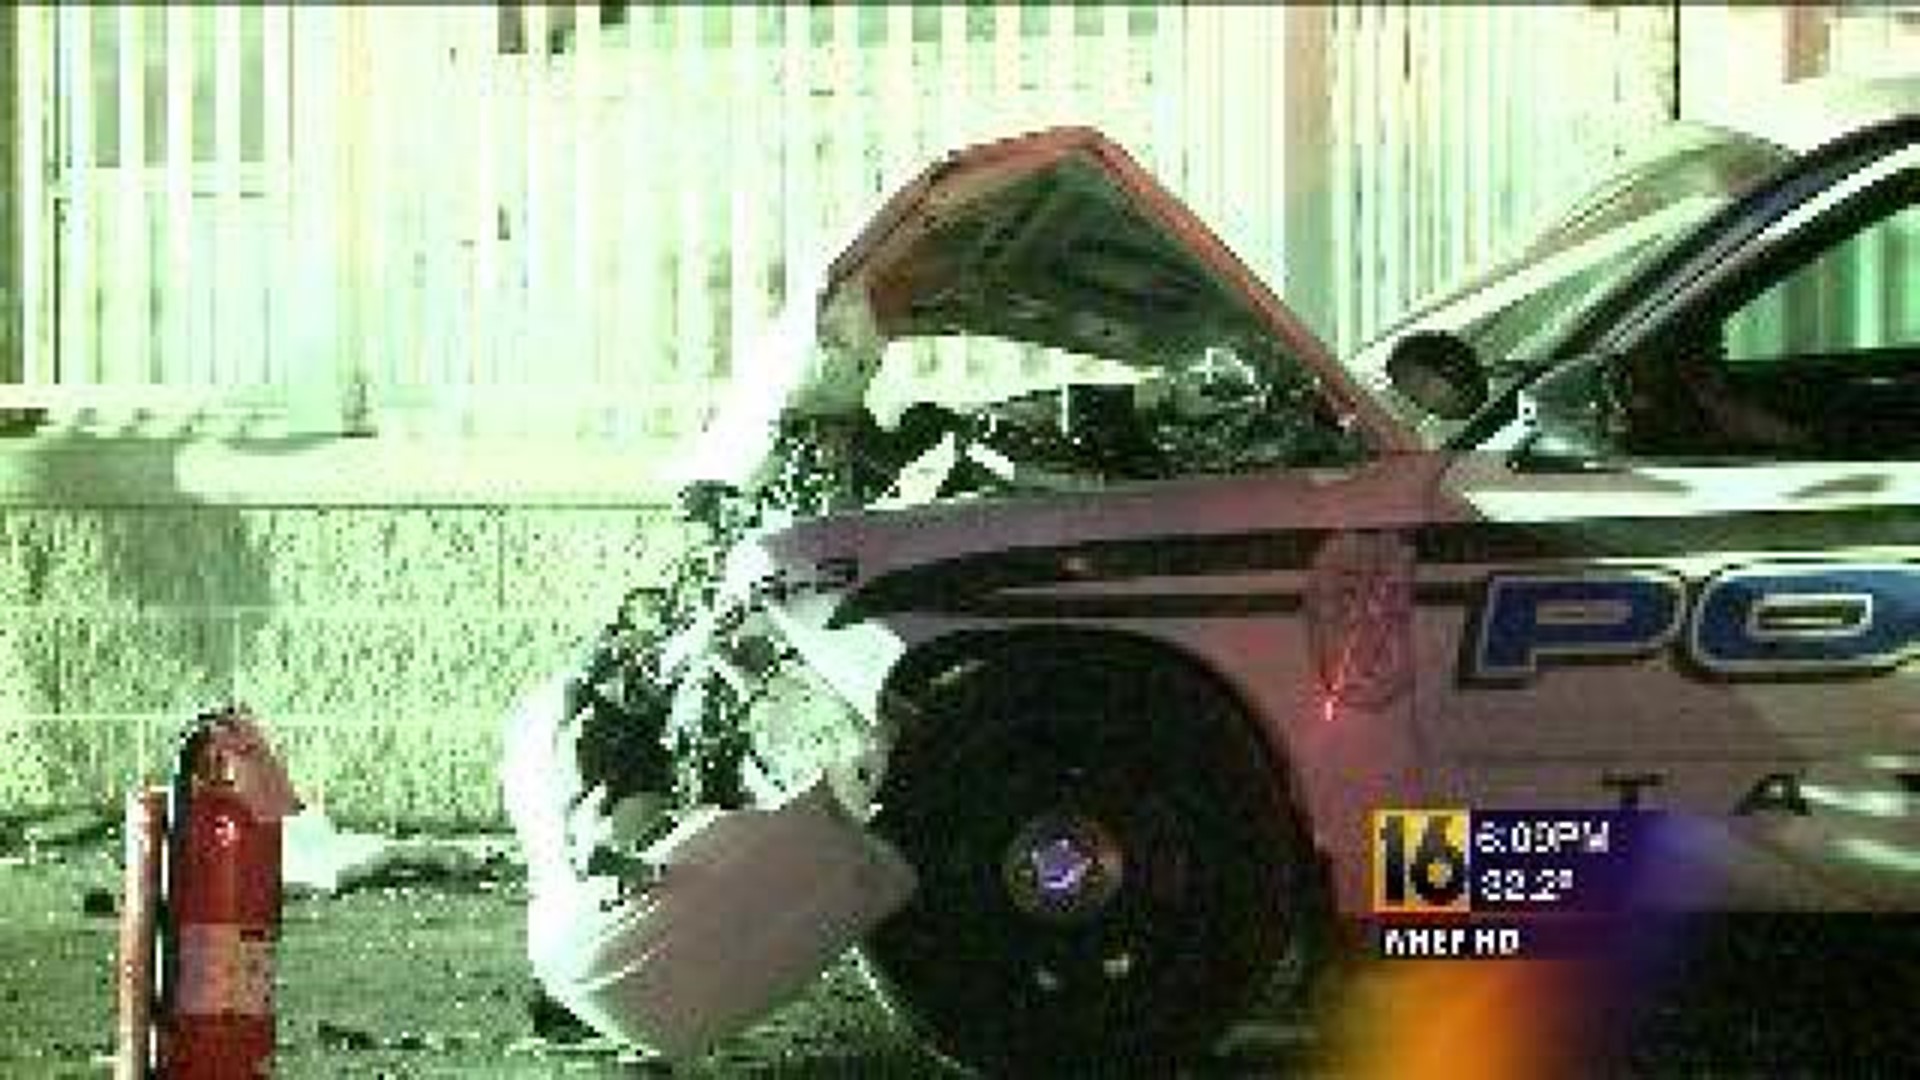 Police Cruiser and Car Collide